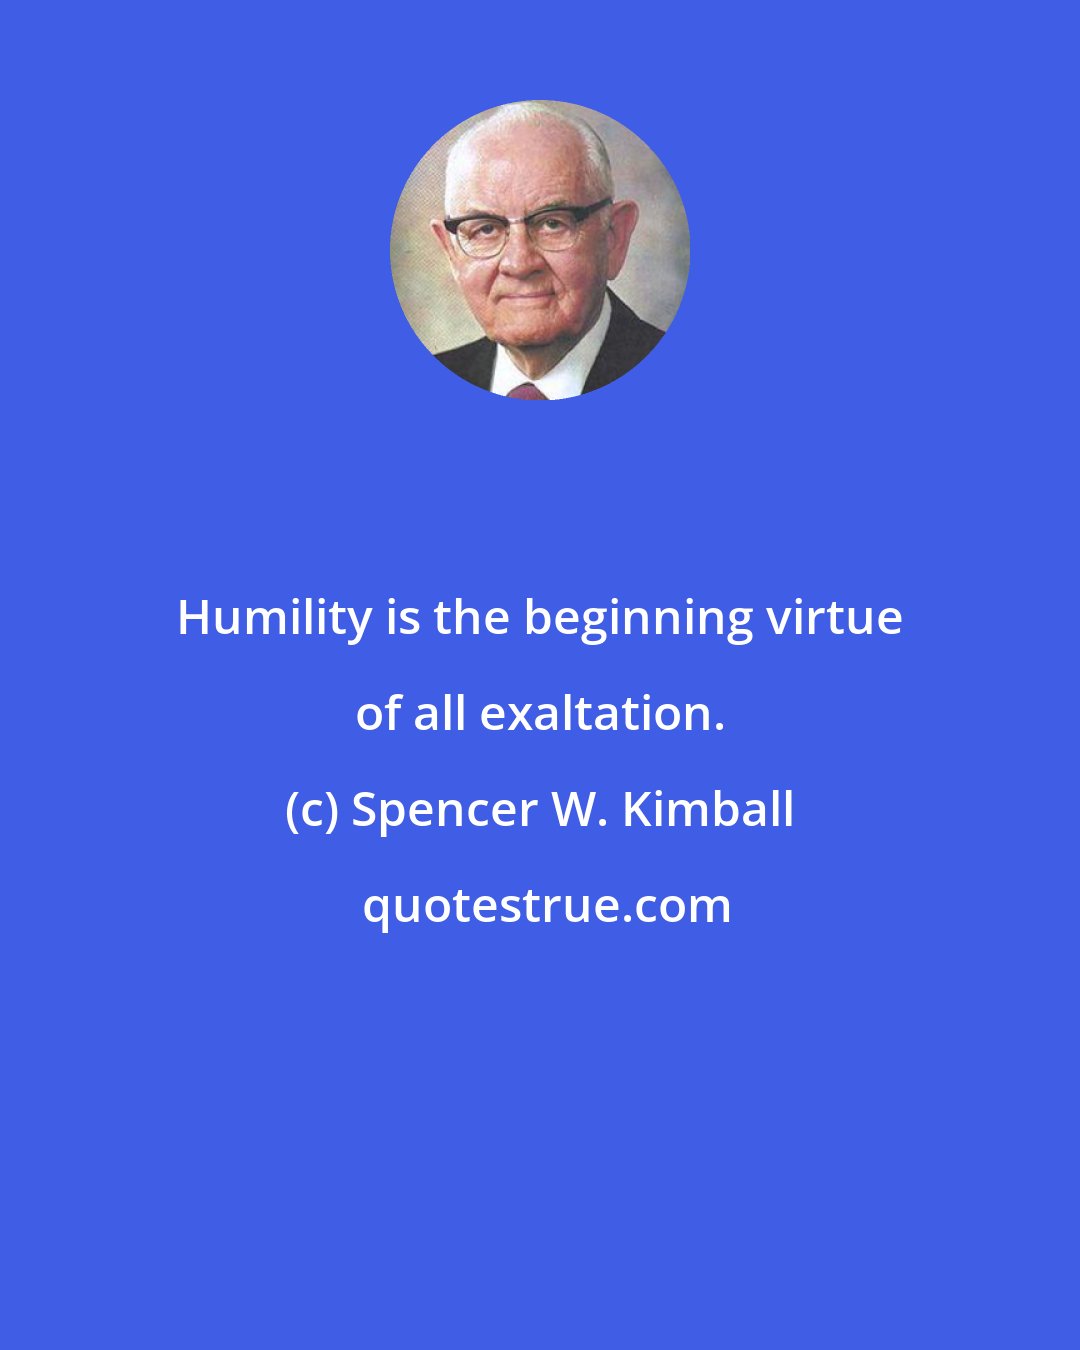 Spencer W. Kimball: Humility is the beginning virtue of all exaltation.